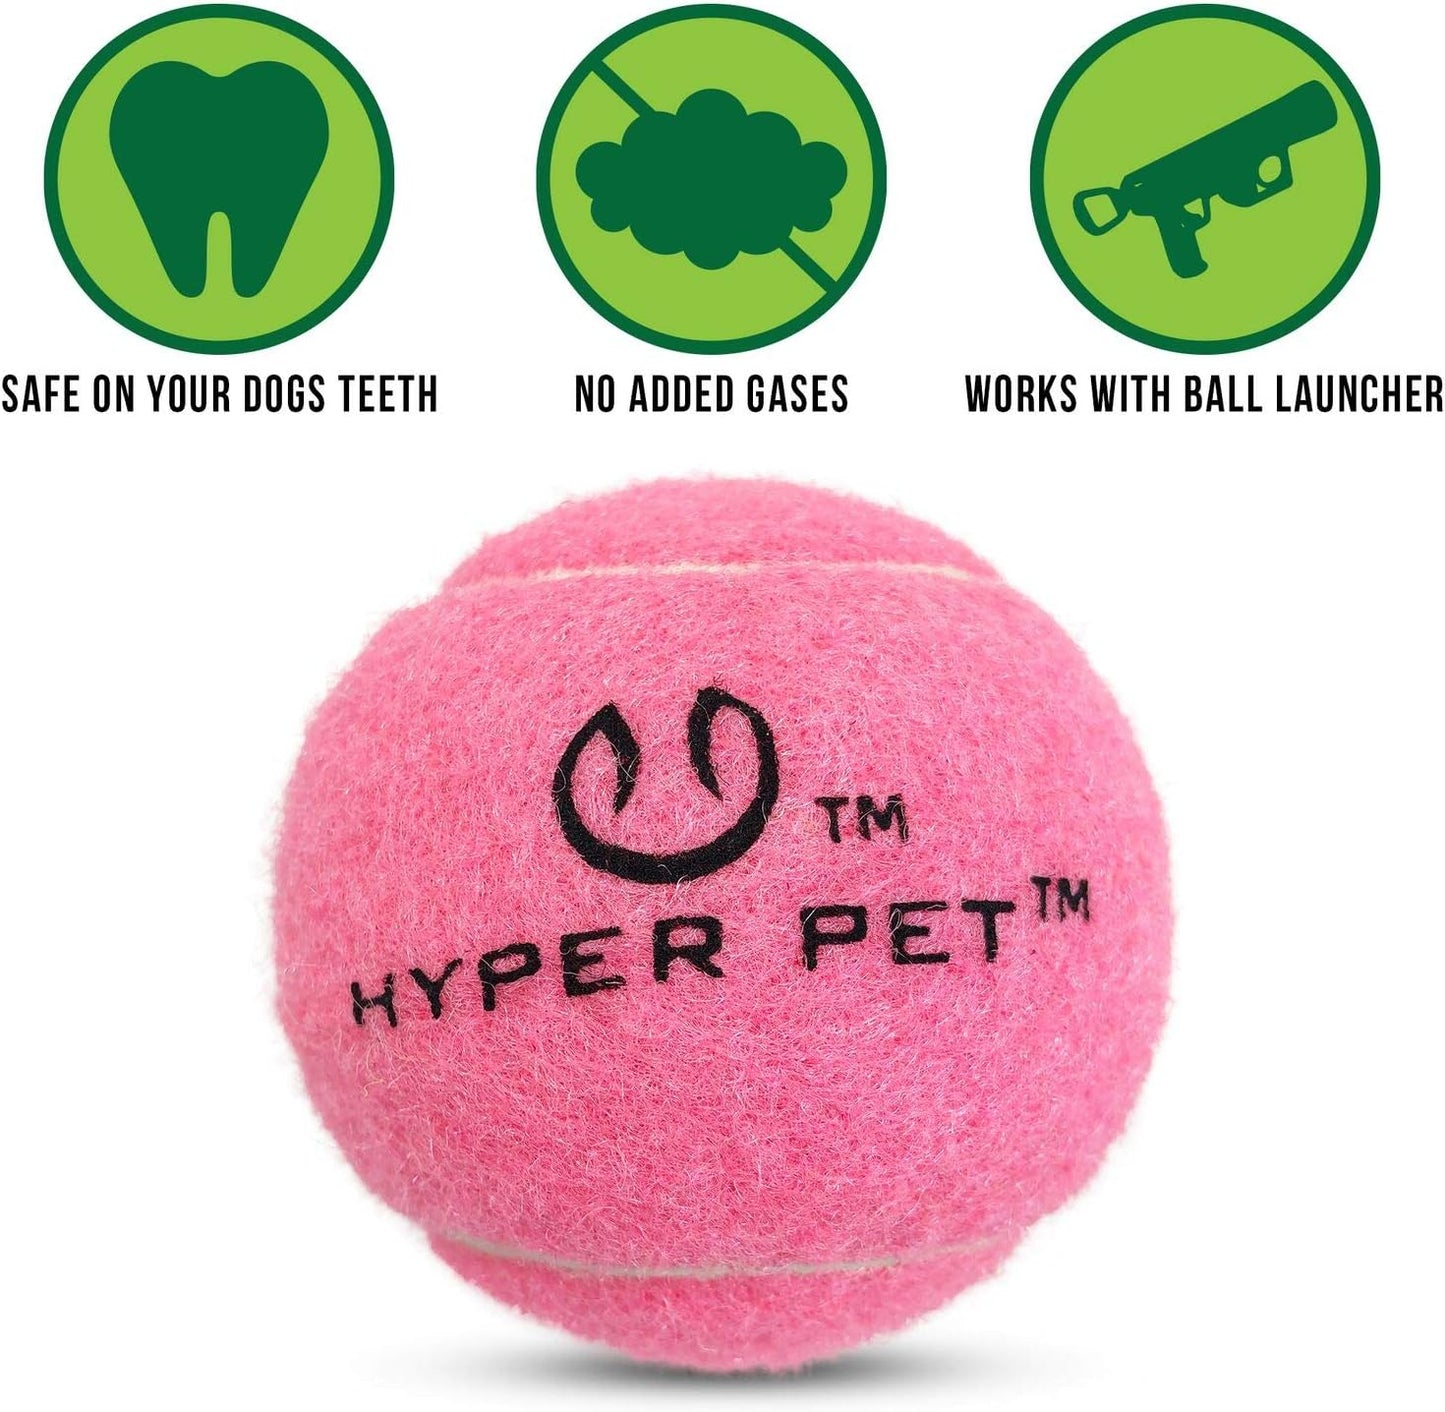 Hyper Pet Mini Tennis Balls for Dogs, Pet Safe Dog Toys for Exercise and Training, Pack of 4, Pink